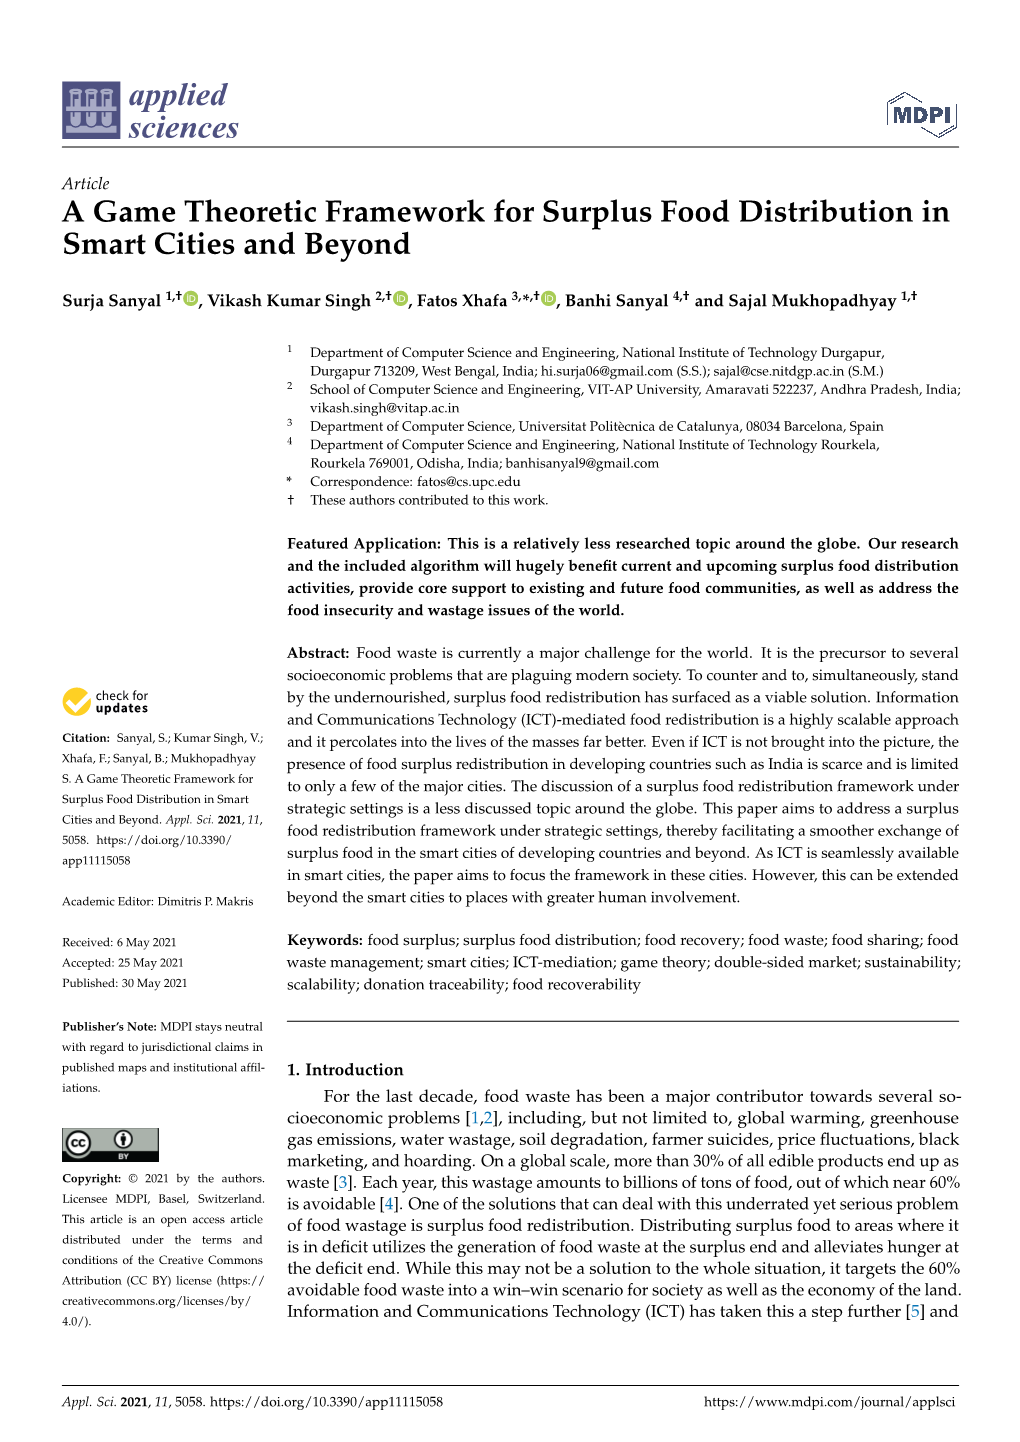 A Game Theoretic Framework for Surplus Food Distribution in Smart Cities and Beyond